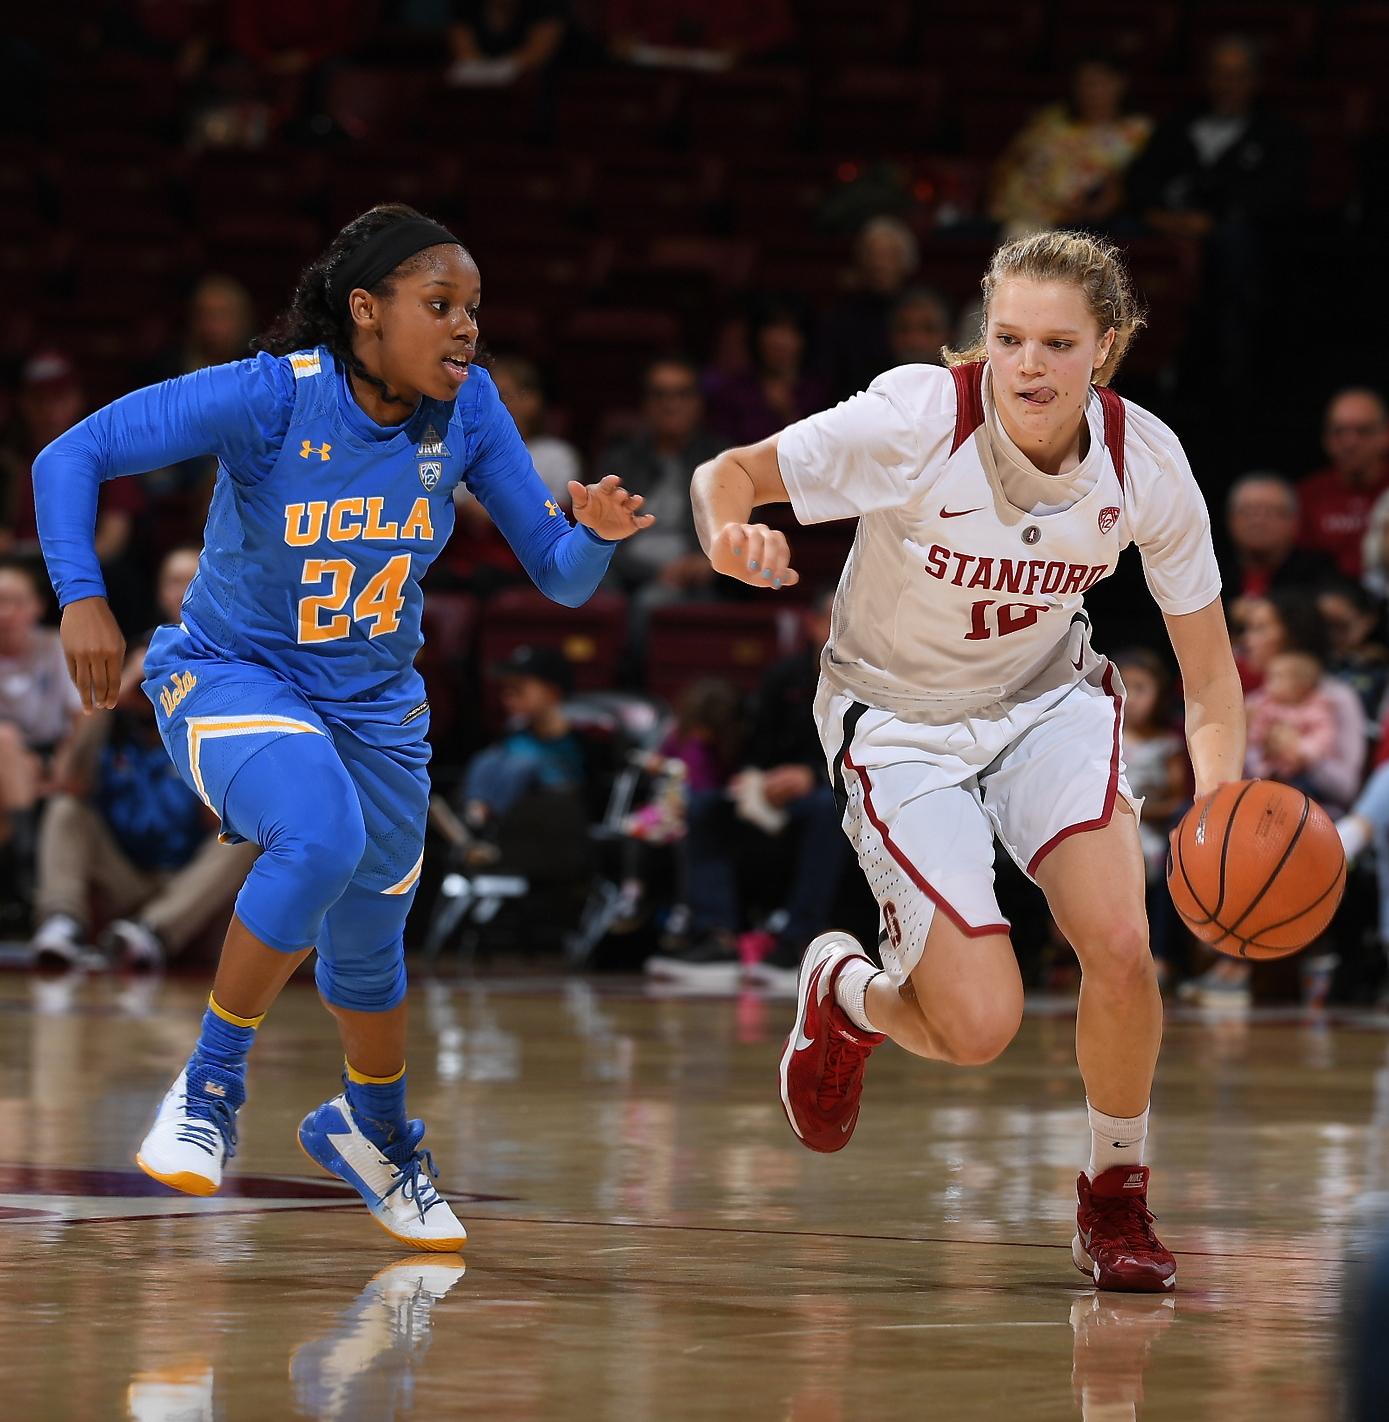 Stanford shoots 52 percent to beat UCLA in Pac-12 opener